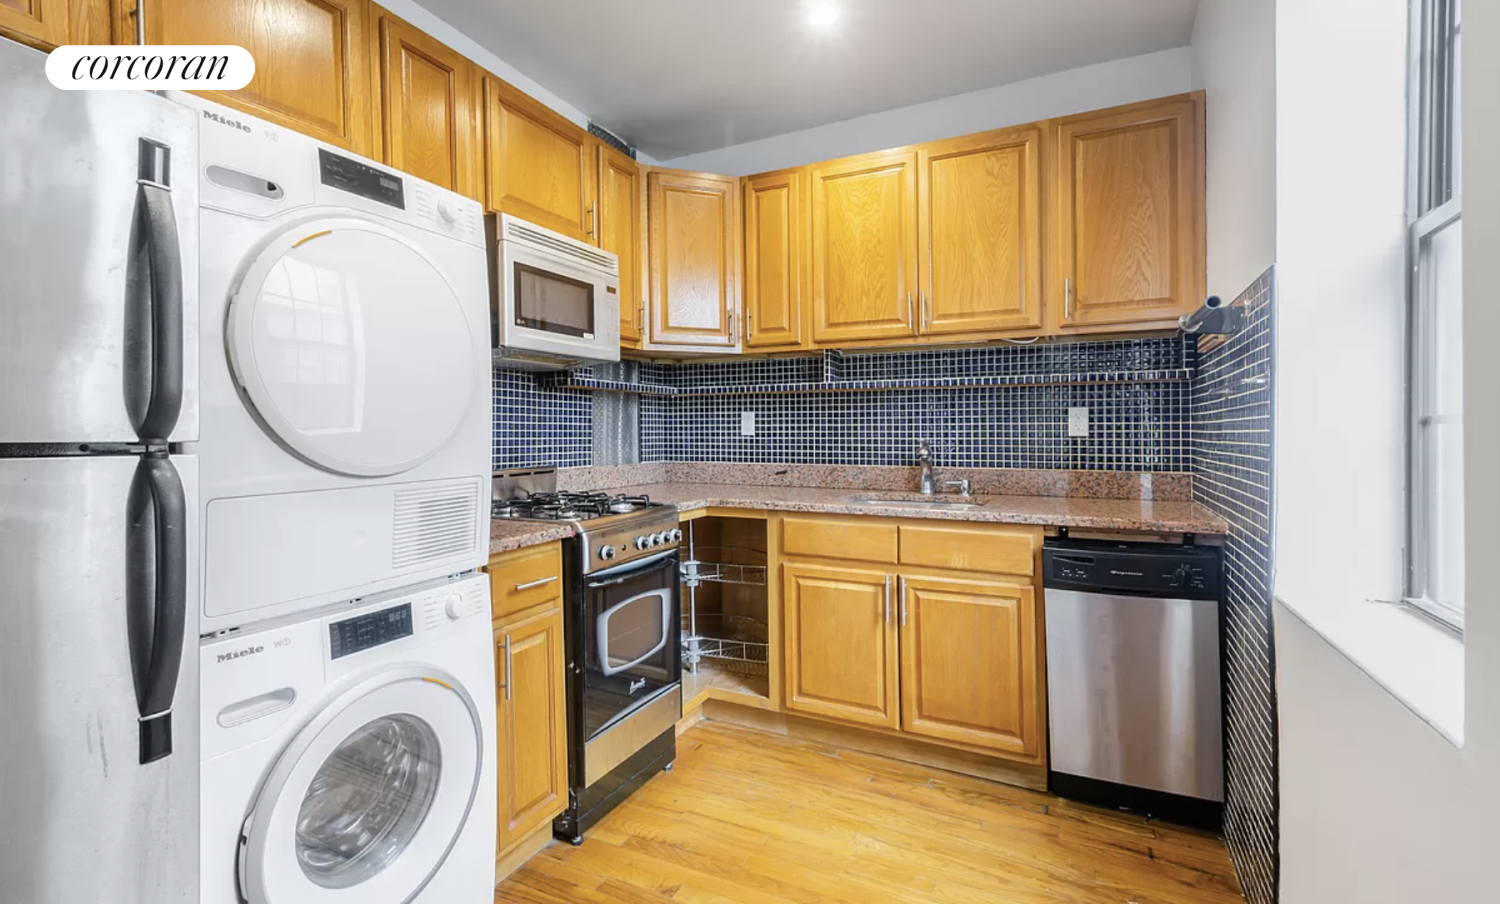 120 Suffolk Street 4B, Lower East Side, Downtown, NYC - 2 Bedrooms  
1 Bathrooms  
5 Rooms - 